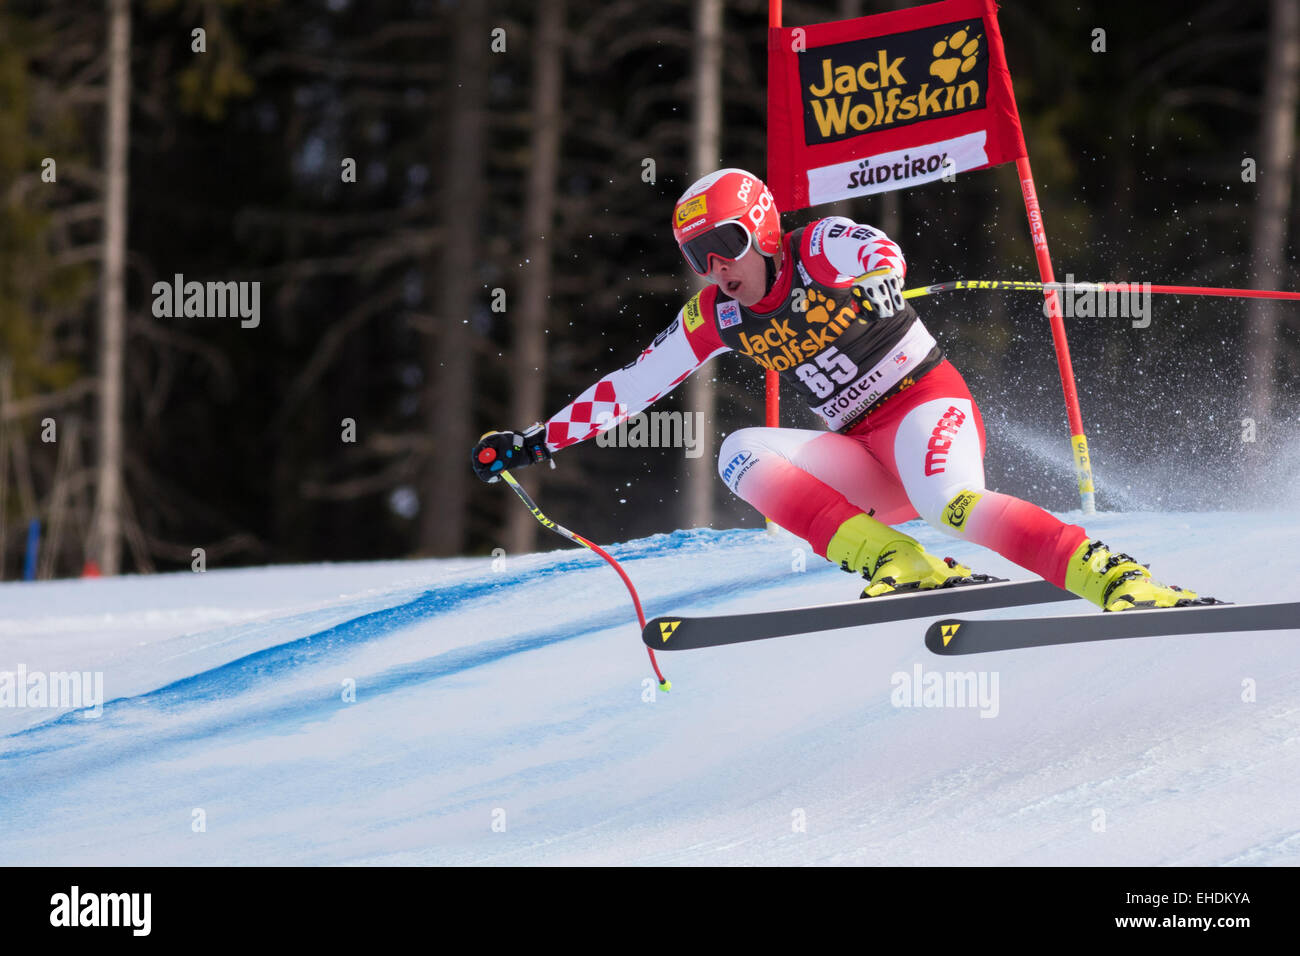 Val Gardena, Italy 20 December 2014. ALESSANDRIA Arnaud (Mon) competing in the Audi FIS Alpine Skiing World Cup Super-G race Stock Photo